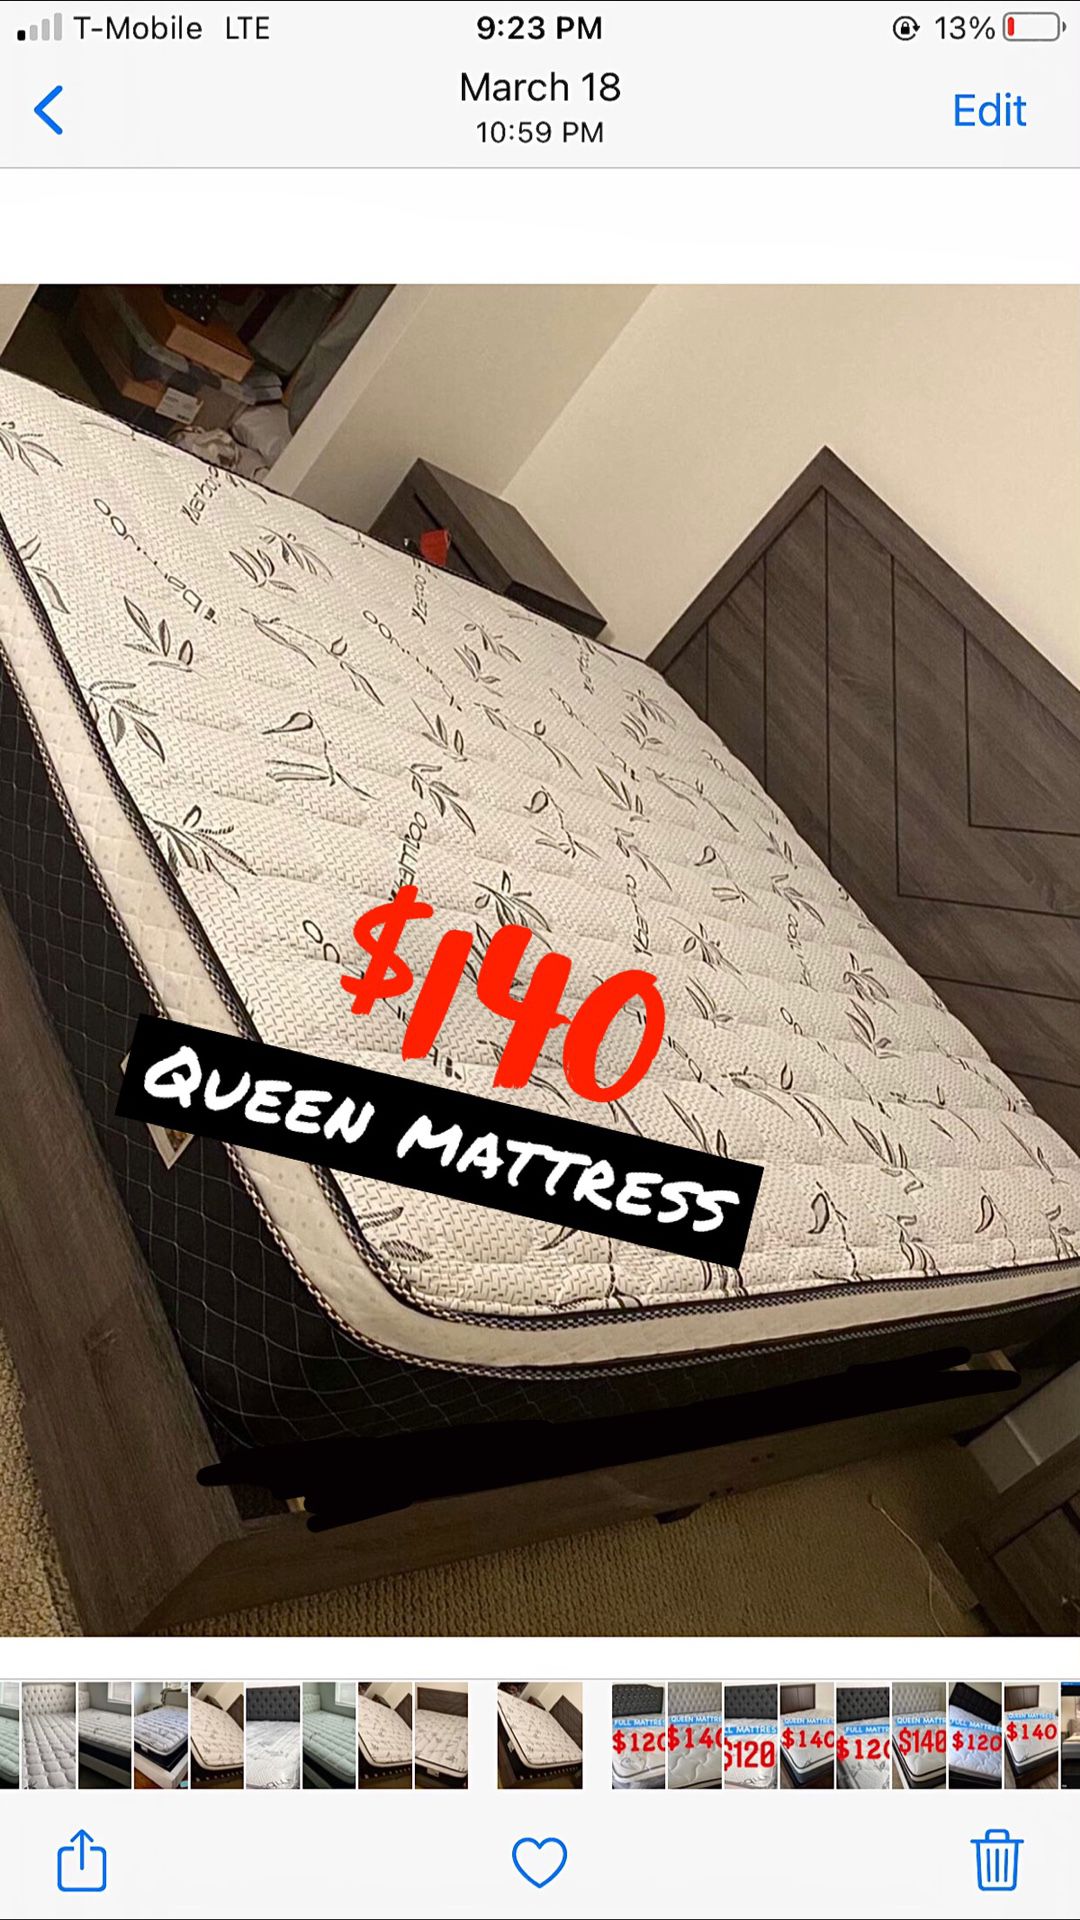 ✨BRAND NEW PILLOW TOP MATTRESSES ✨ ✨NUEVOS COLCHONES PILLOW TOP ✨   🔻KING SIZE $220 ➖ $320 with box spring   🔻QUEEN SIZE $140 ➖ $200 With Box Spring